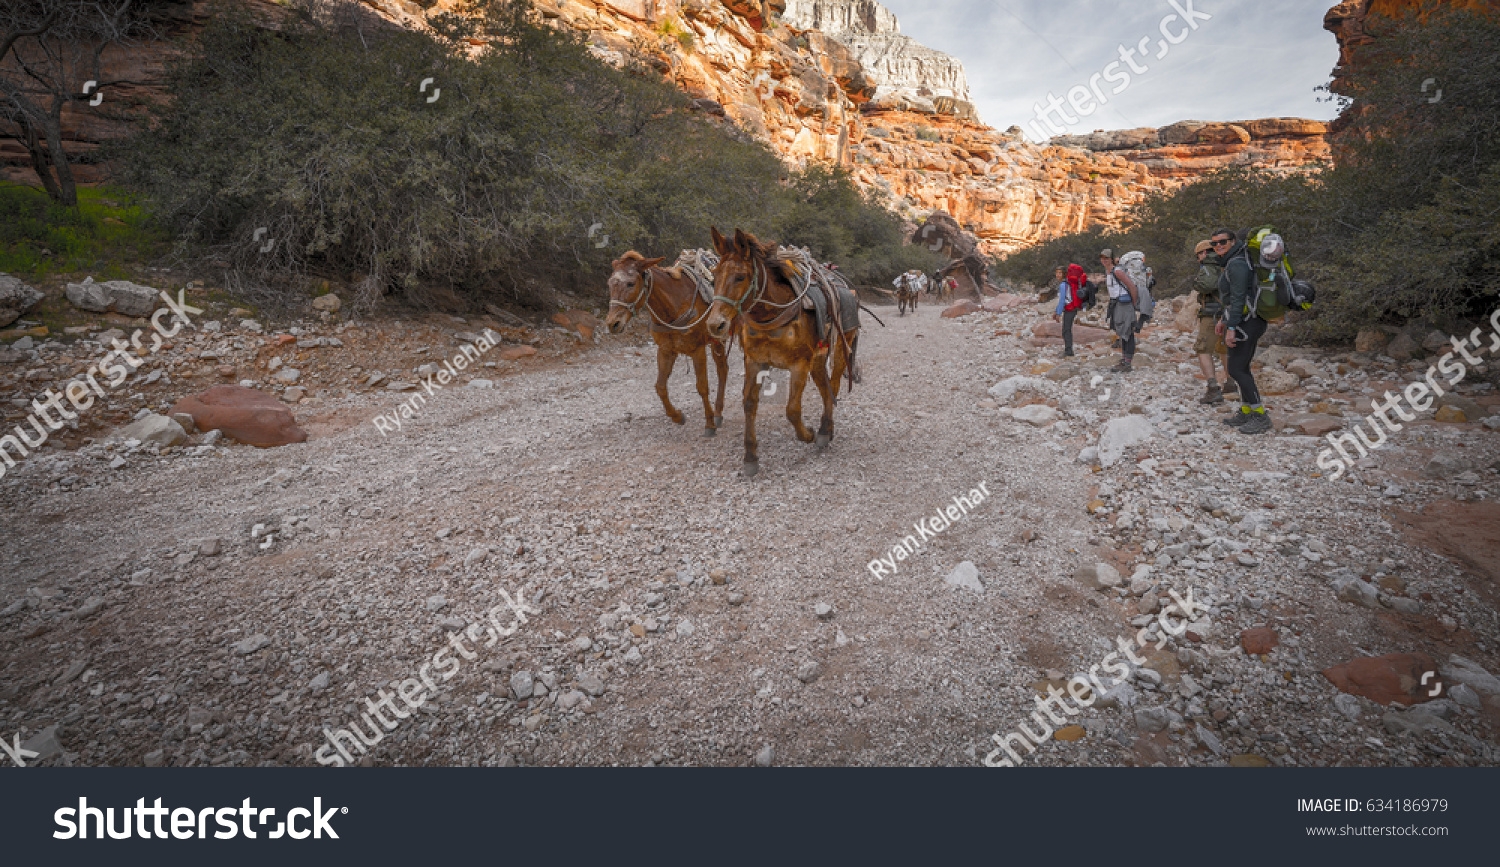 Horses running by group of Hikers backpacking through the Grand Canyon to Havasu Falls Arizona. #634186979